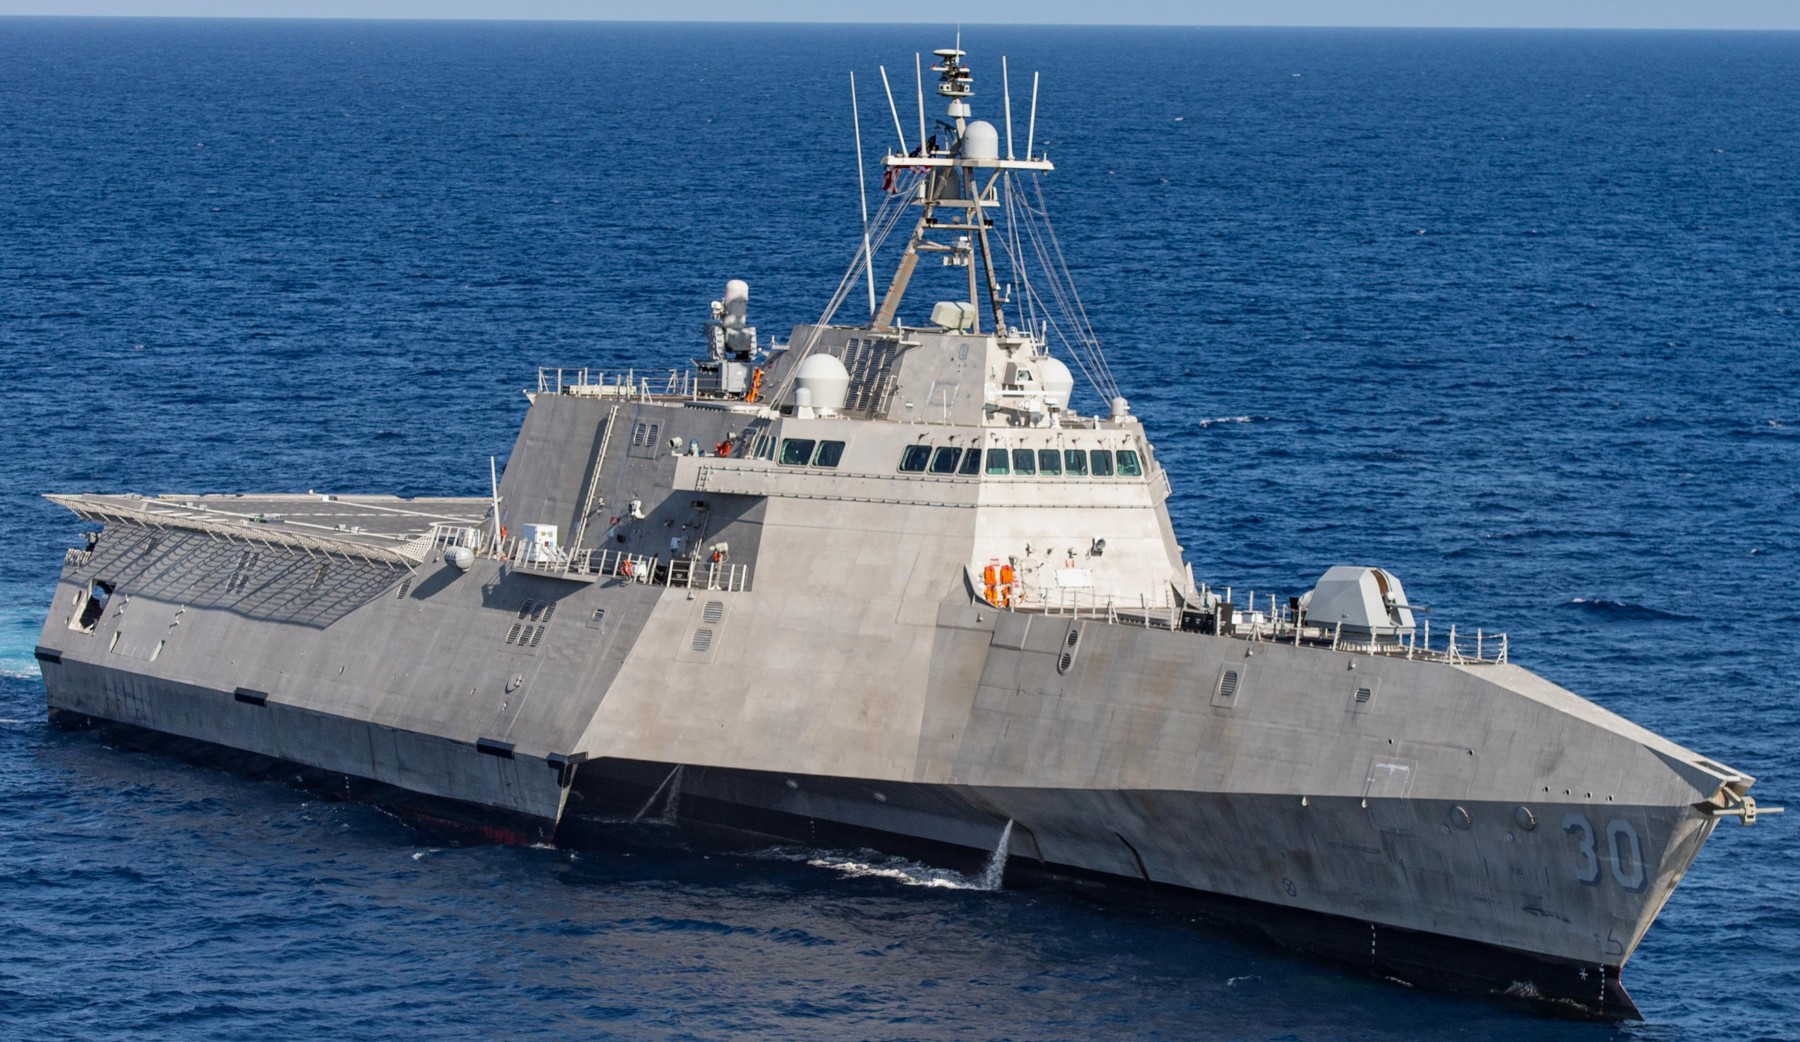 lcs-30 uss canberra littoral combat ship independence class us navy austal usa san diego 15x